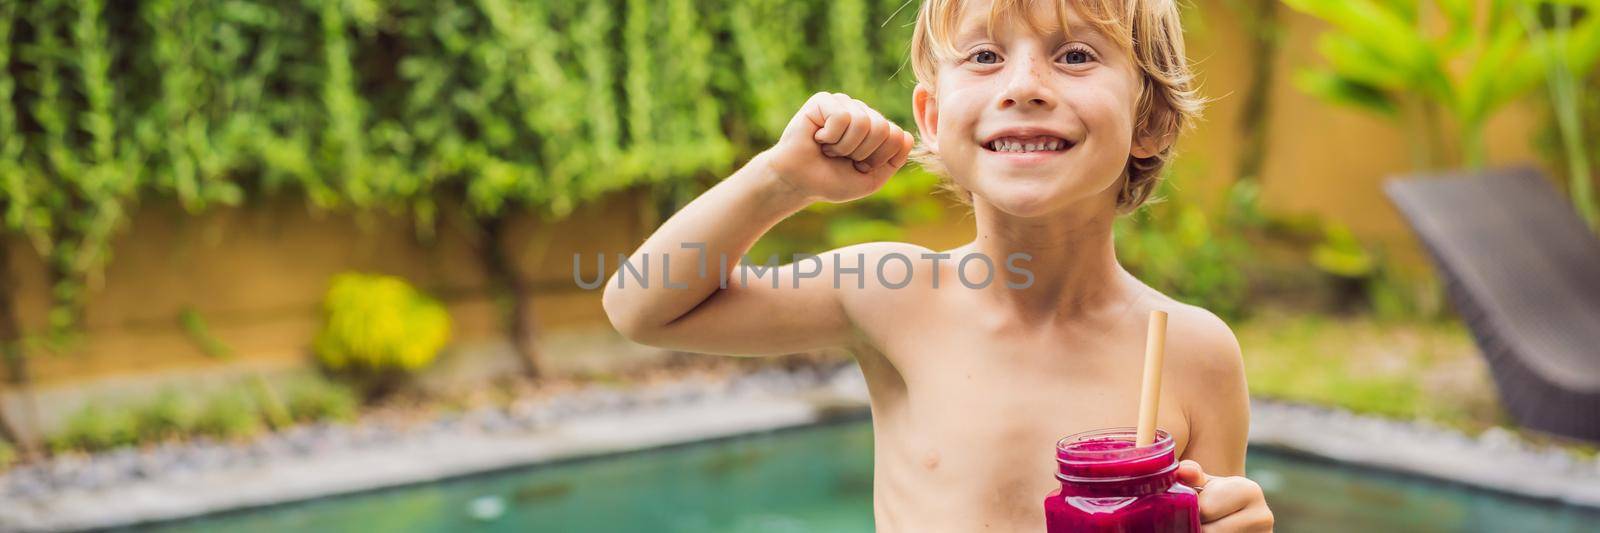 Cute boy holding a bottle of dragon fruit smoothie or juice is flexing his muscles and smiling. BANNER, LONG FORMAT